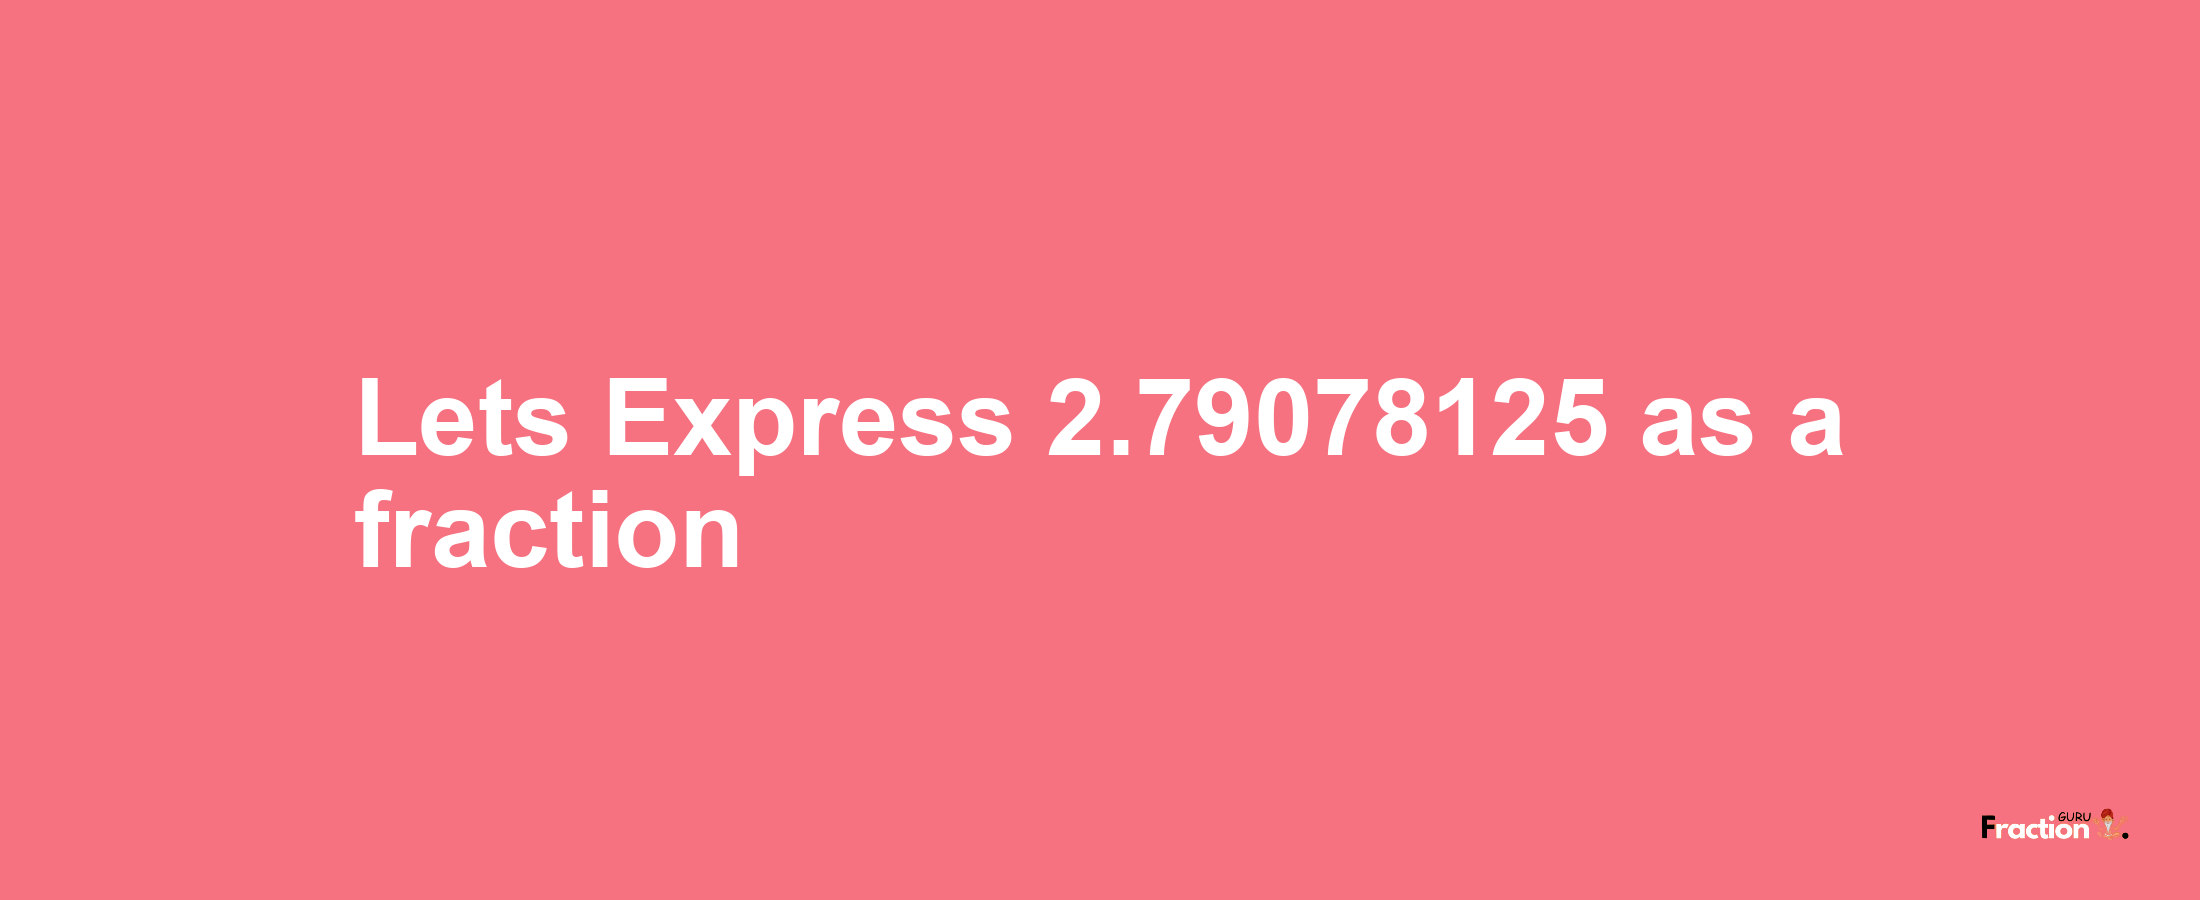 Lets Express 2.79078125 as afraction